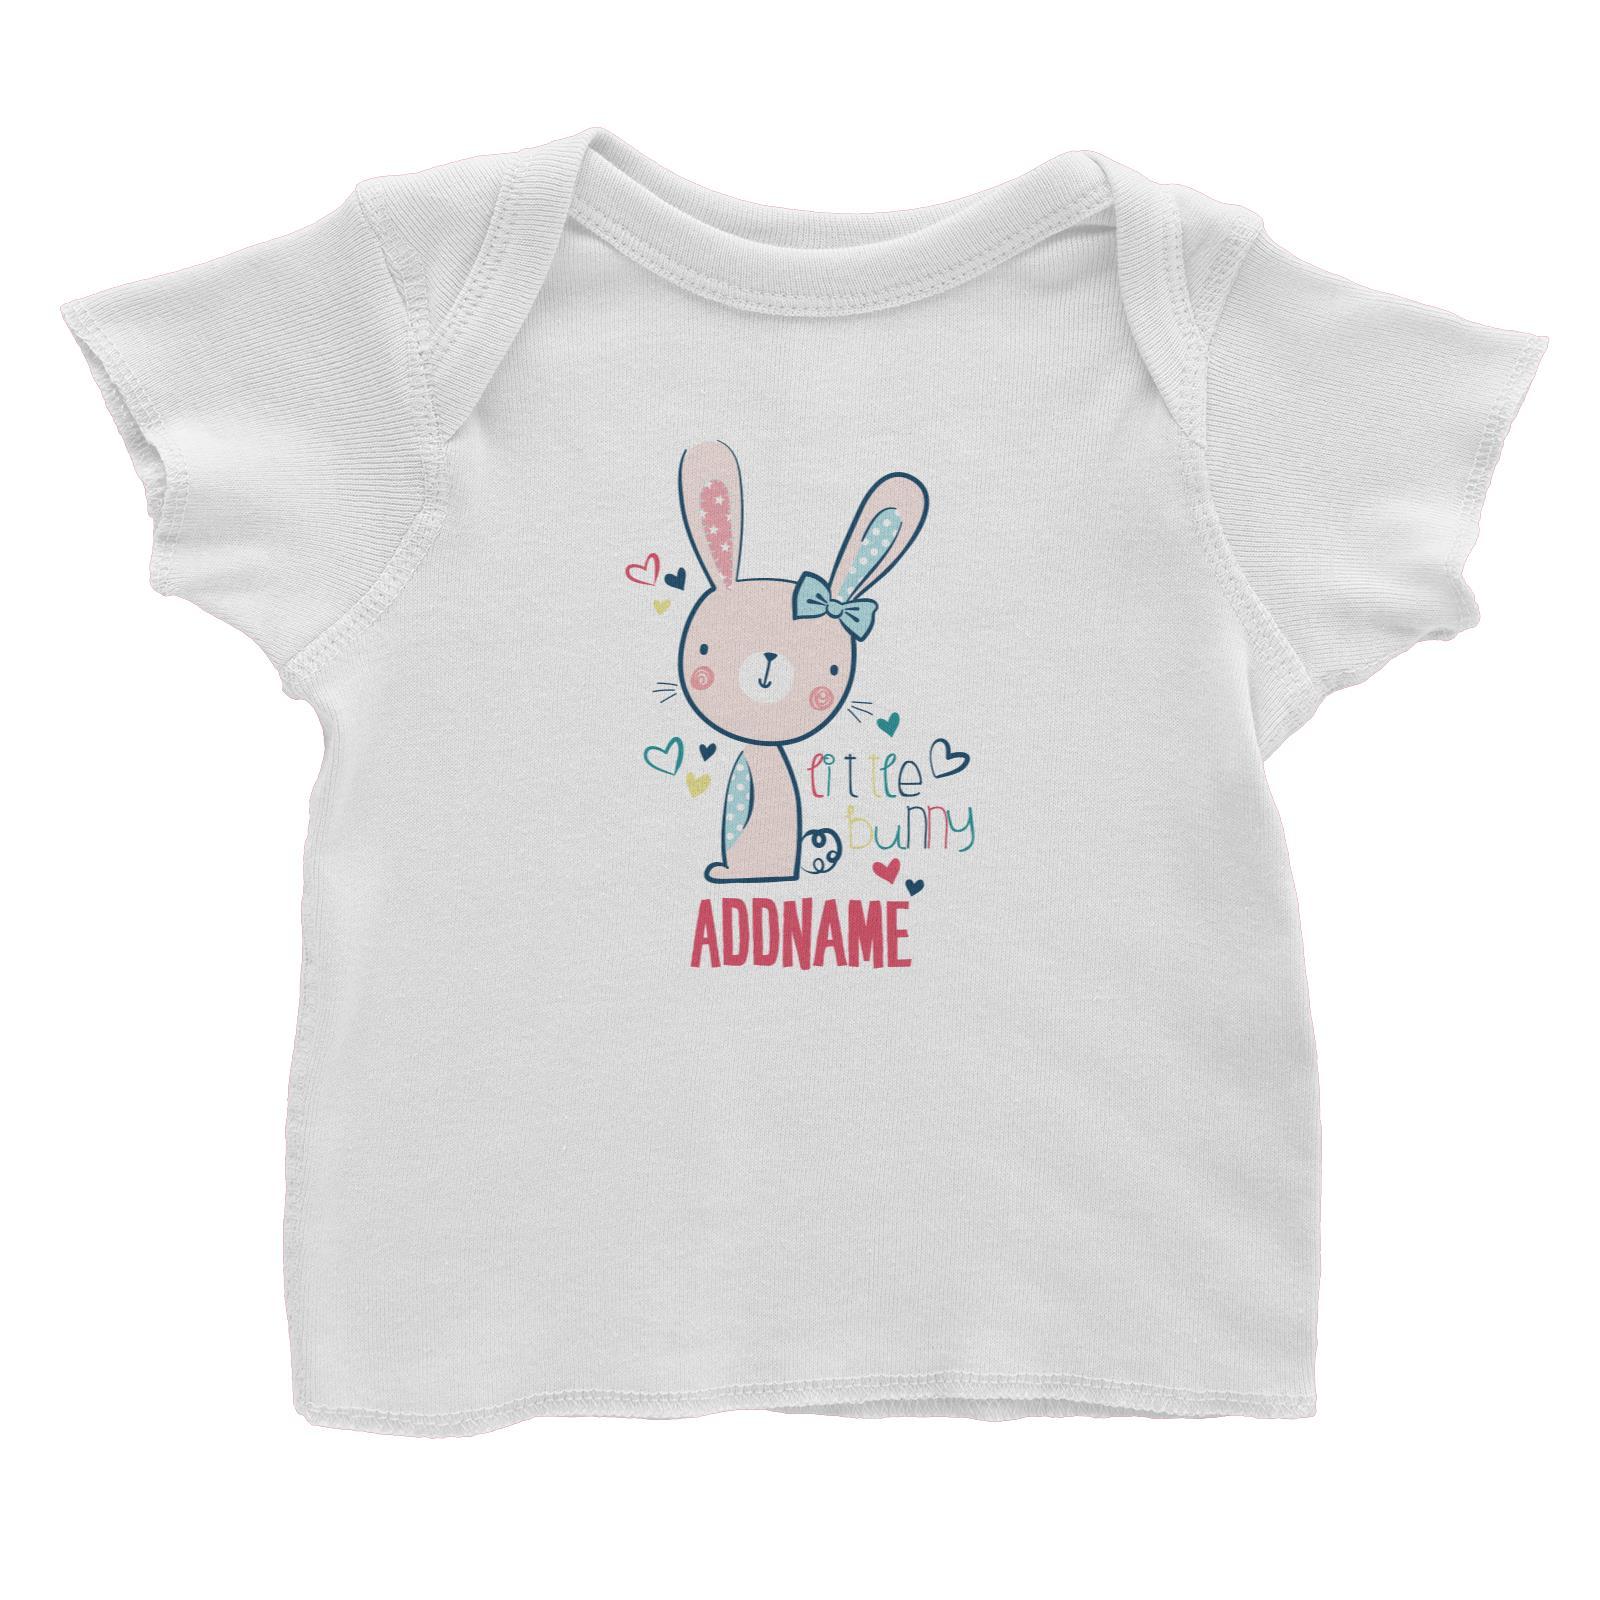 Cool Vibrant Series Cute Little Bunny Addname Baby T-Shirt